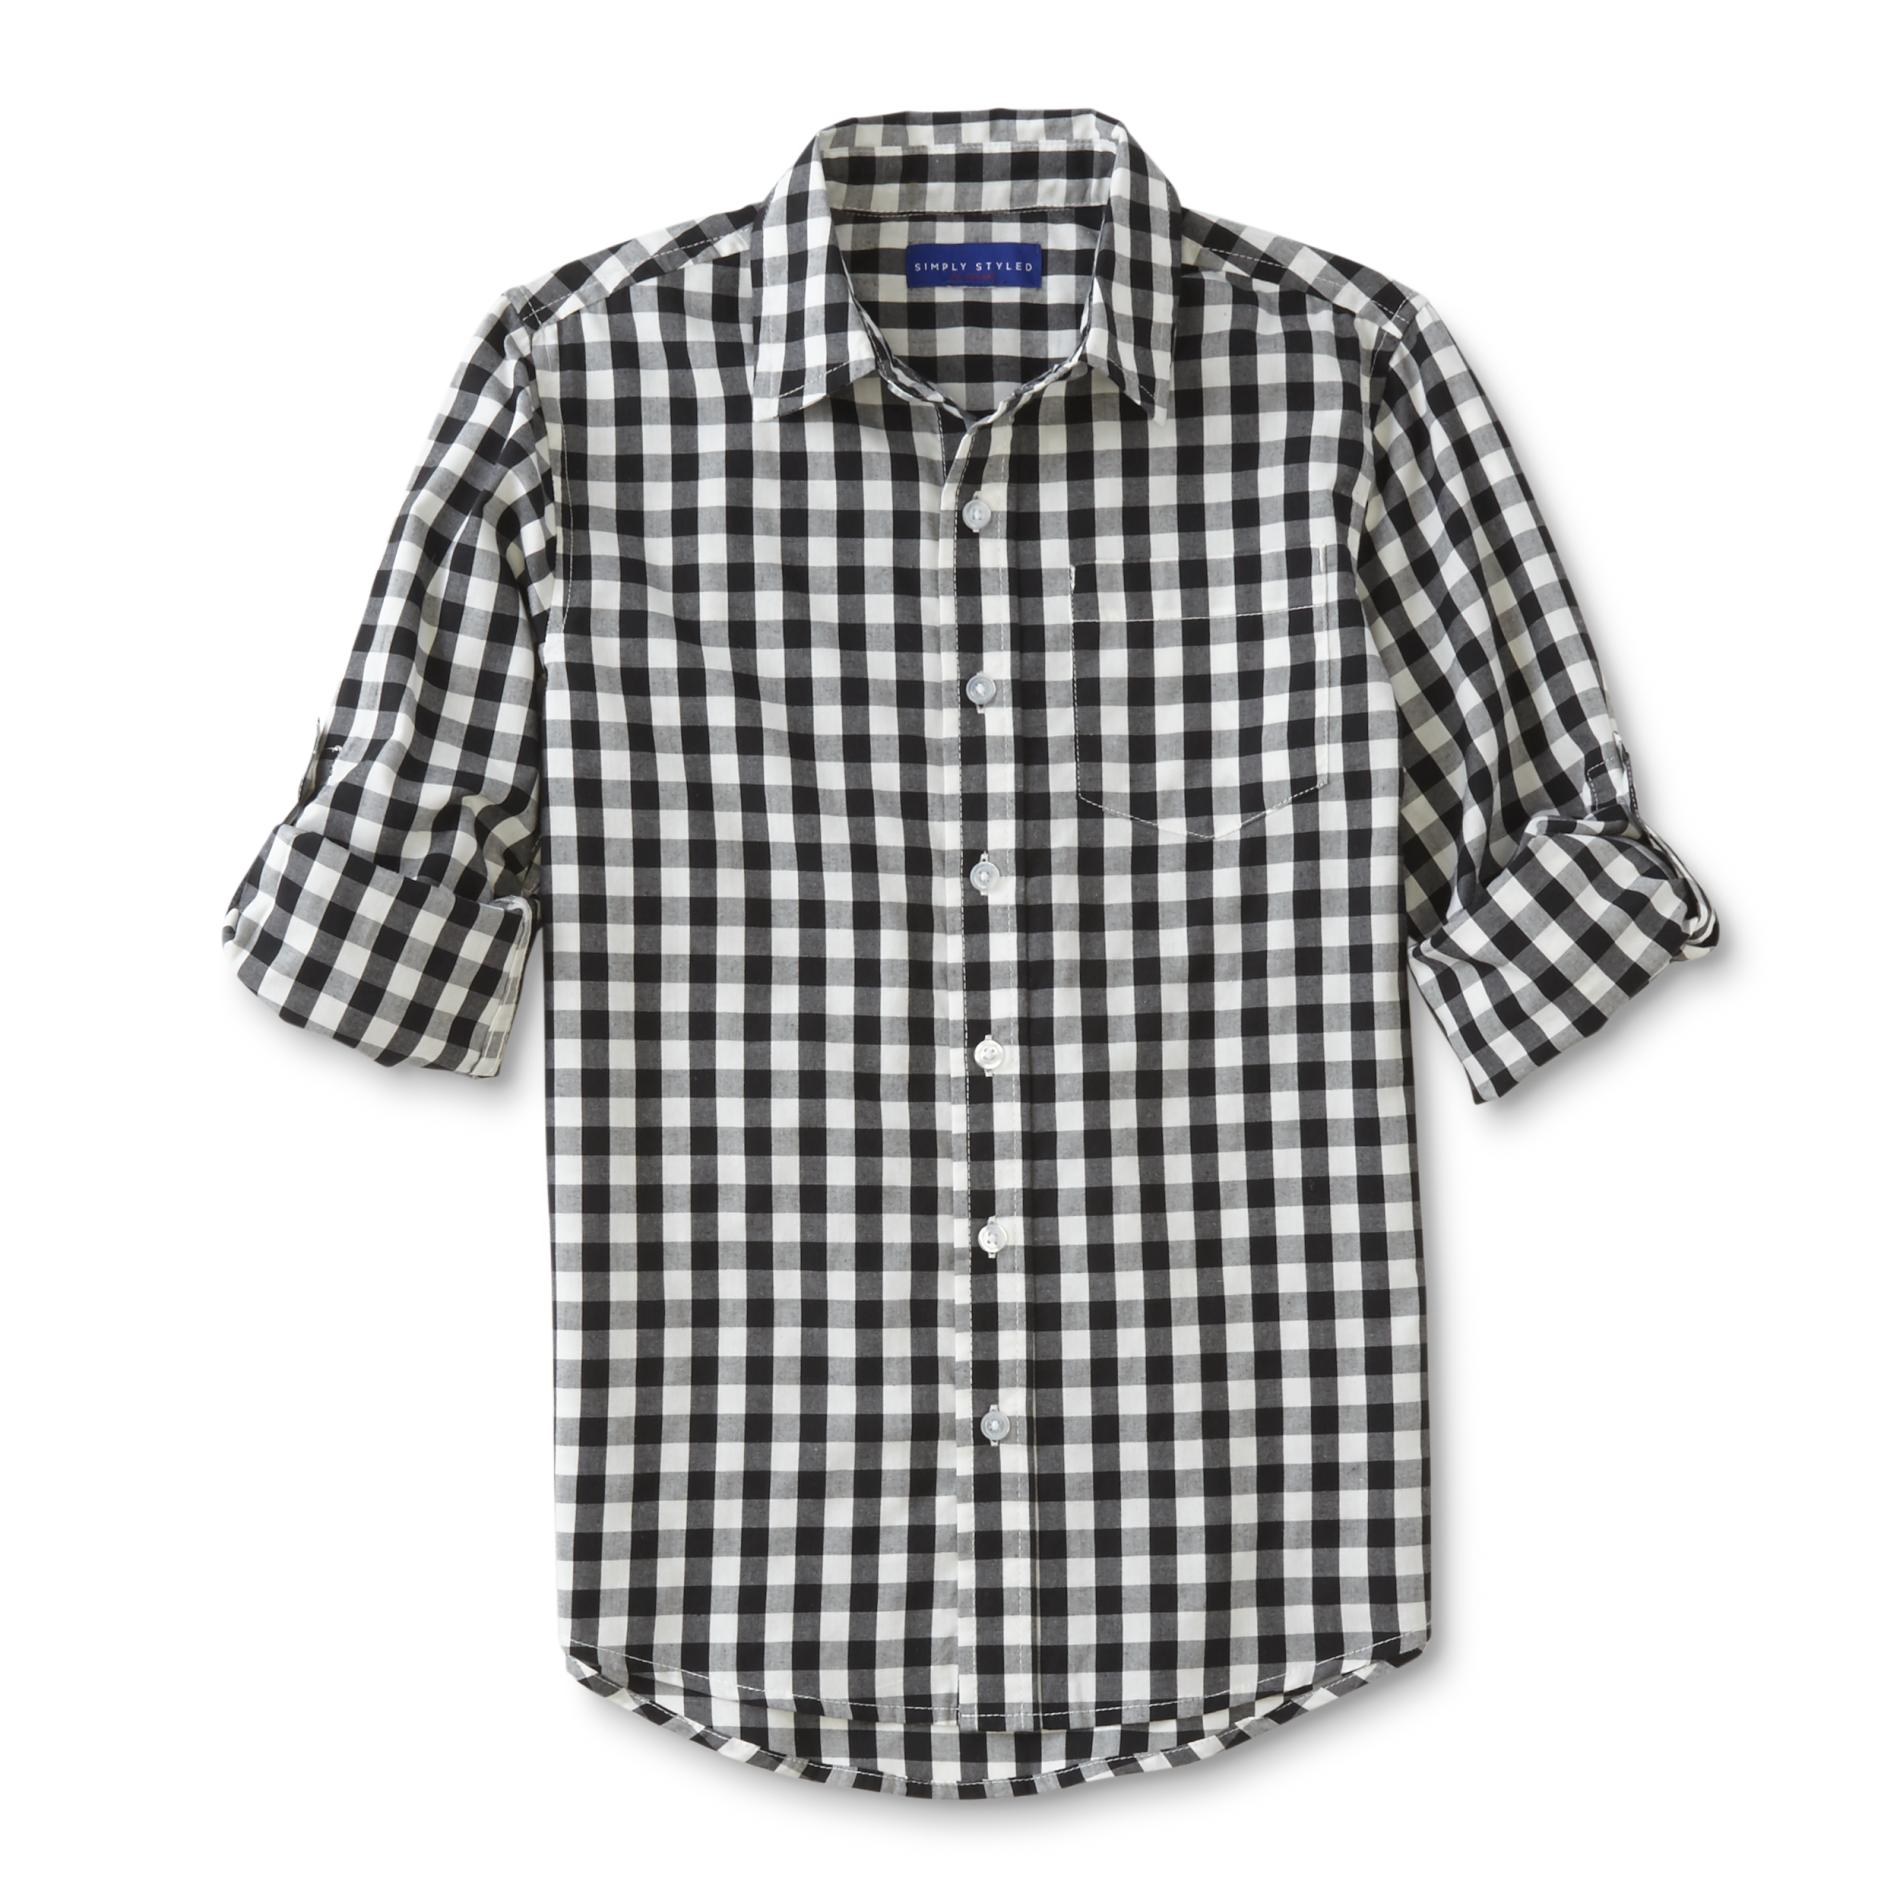 Simply Styled Boys' Button-Front Shirt - Plaid